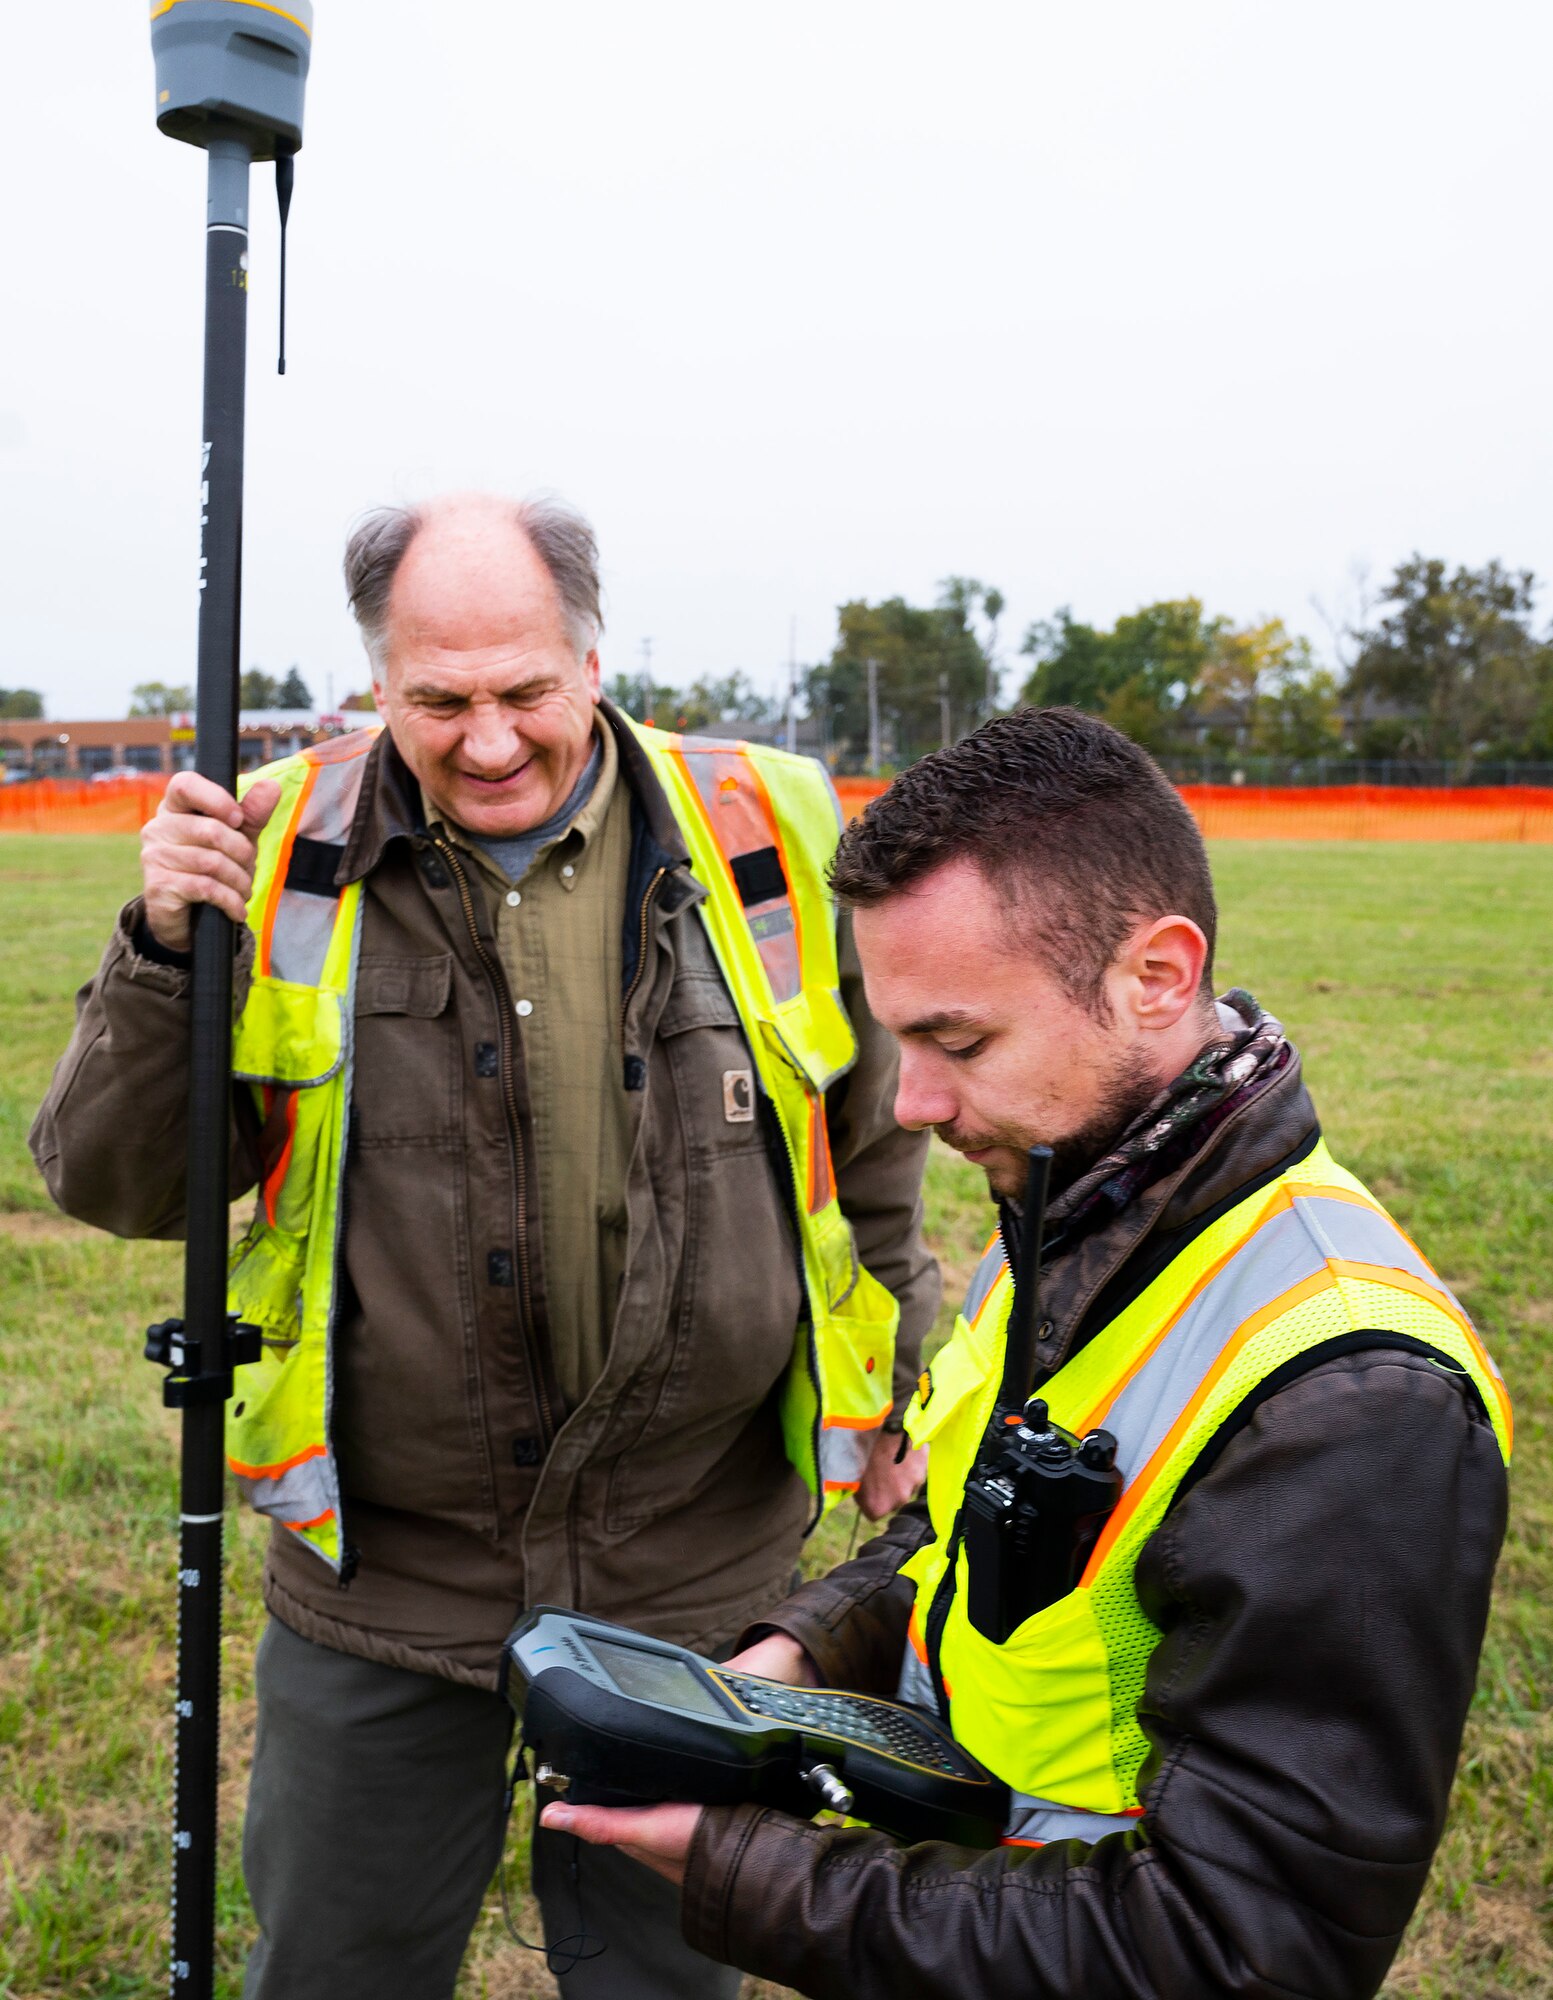 Chris Hess (right) and Patrick Ernst, both with the 88th Civil Engineer Group, measure how far a pumpkin was thrown during the 16th Annual Pumpkin Chuck on Oct. 22, 2021, at Wright-Patterson Air Force Base, Ohio. The chuck was sponsored by the Air Force Life Cycle Management Center’s Engineering Directorate as a STEM event for local schools and organizations. (U.S. Air Force photo by R.J. Oriez)